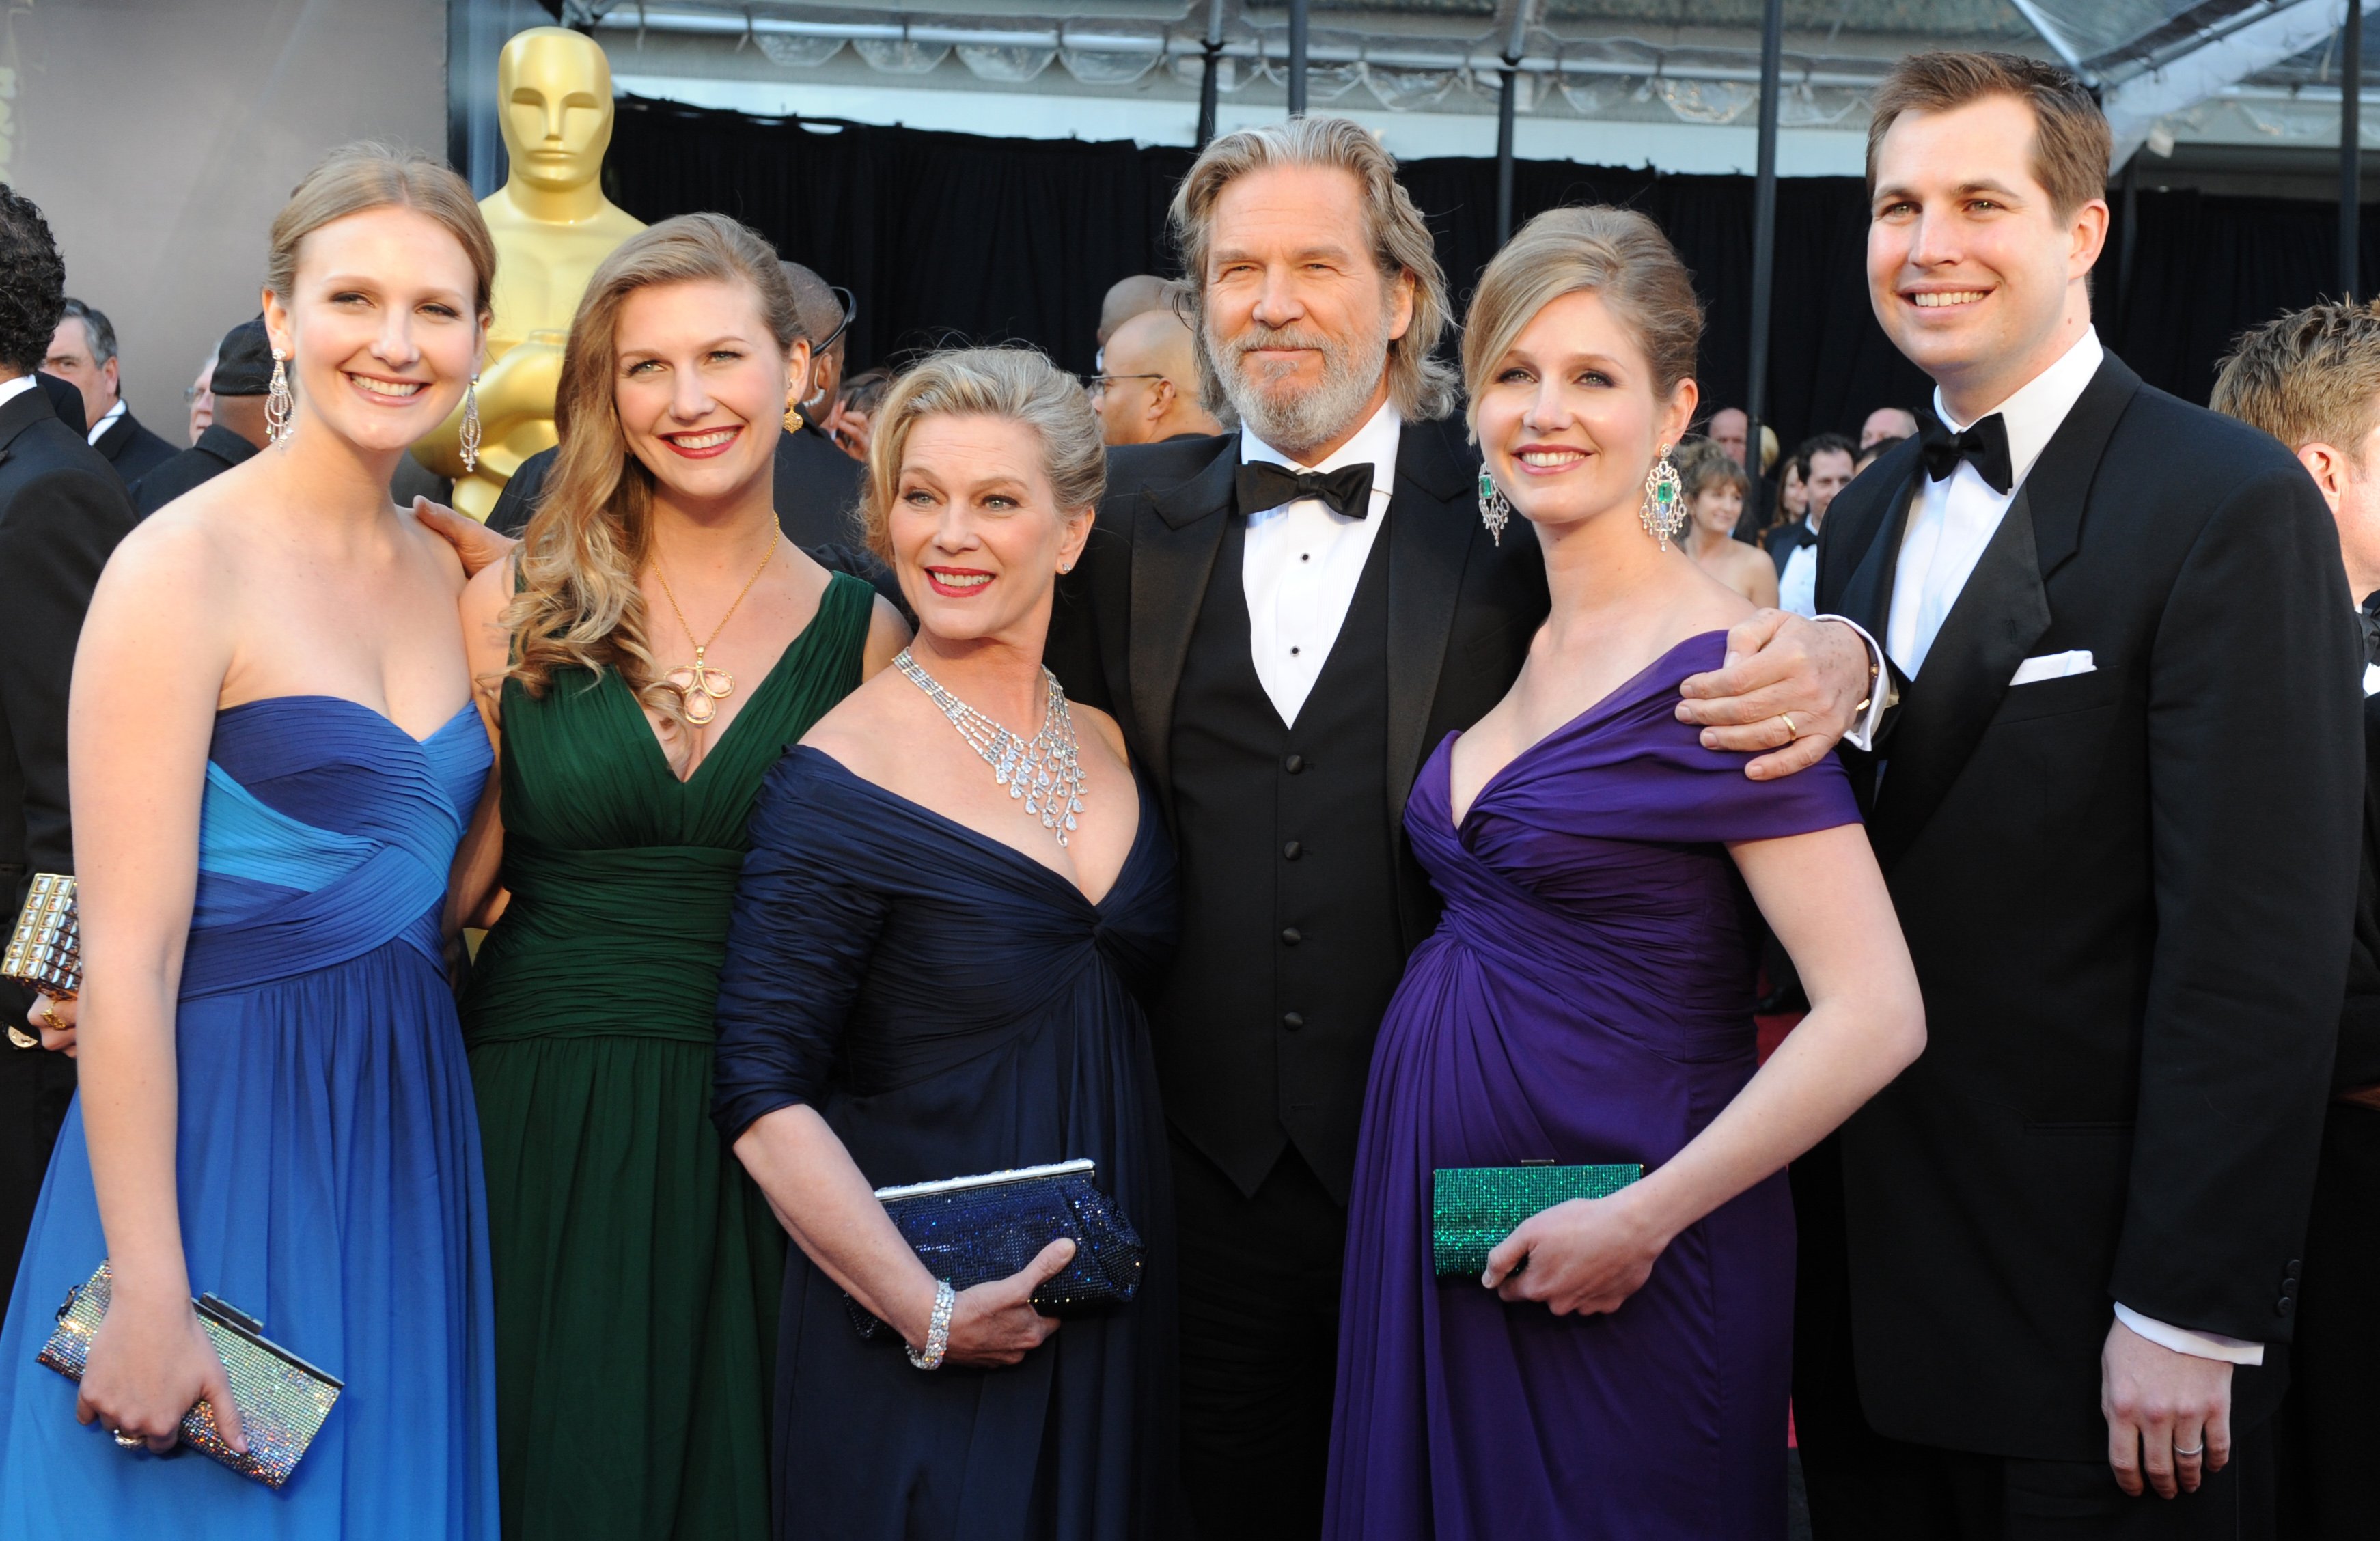 Actor Jeff Bridges and his family arrive on the red carpet for the 83rd Annual Academy Awards held at the Kodak Theatre on February 27, 2011 in Hollywood, California | Source: Getty Images